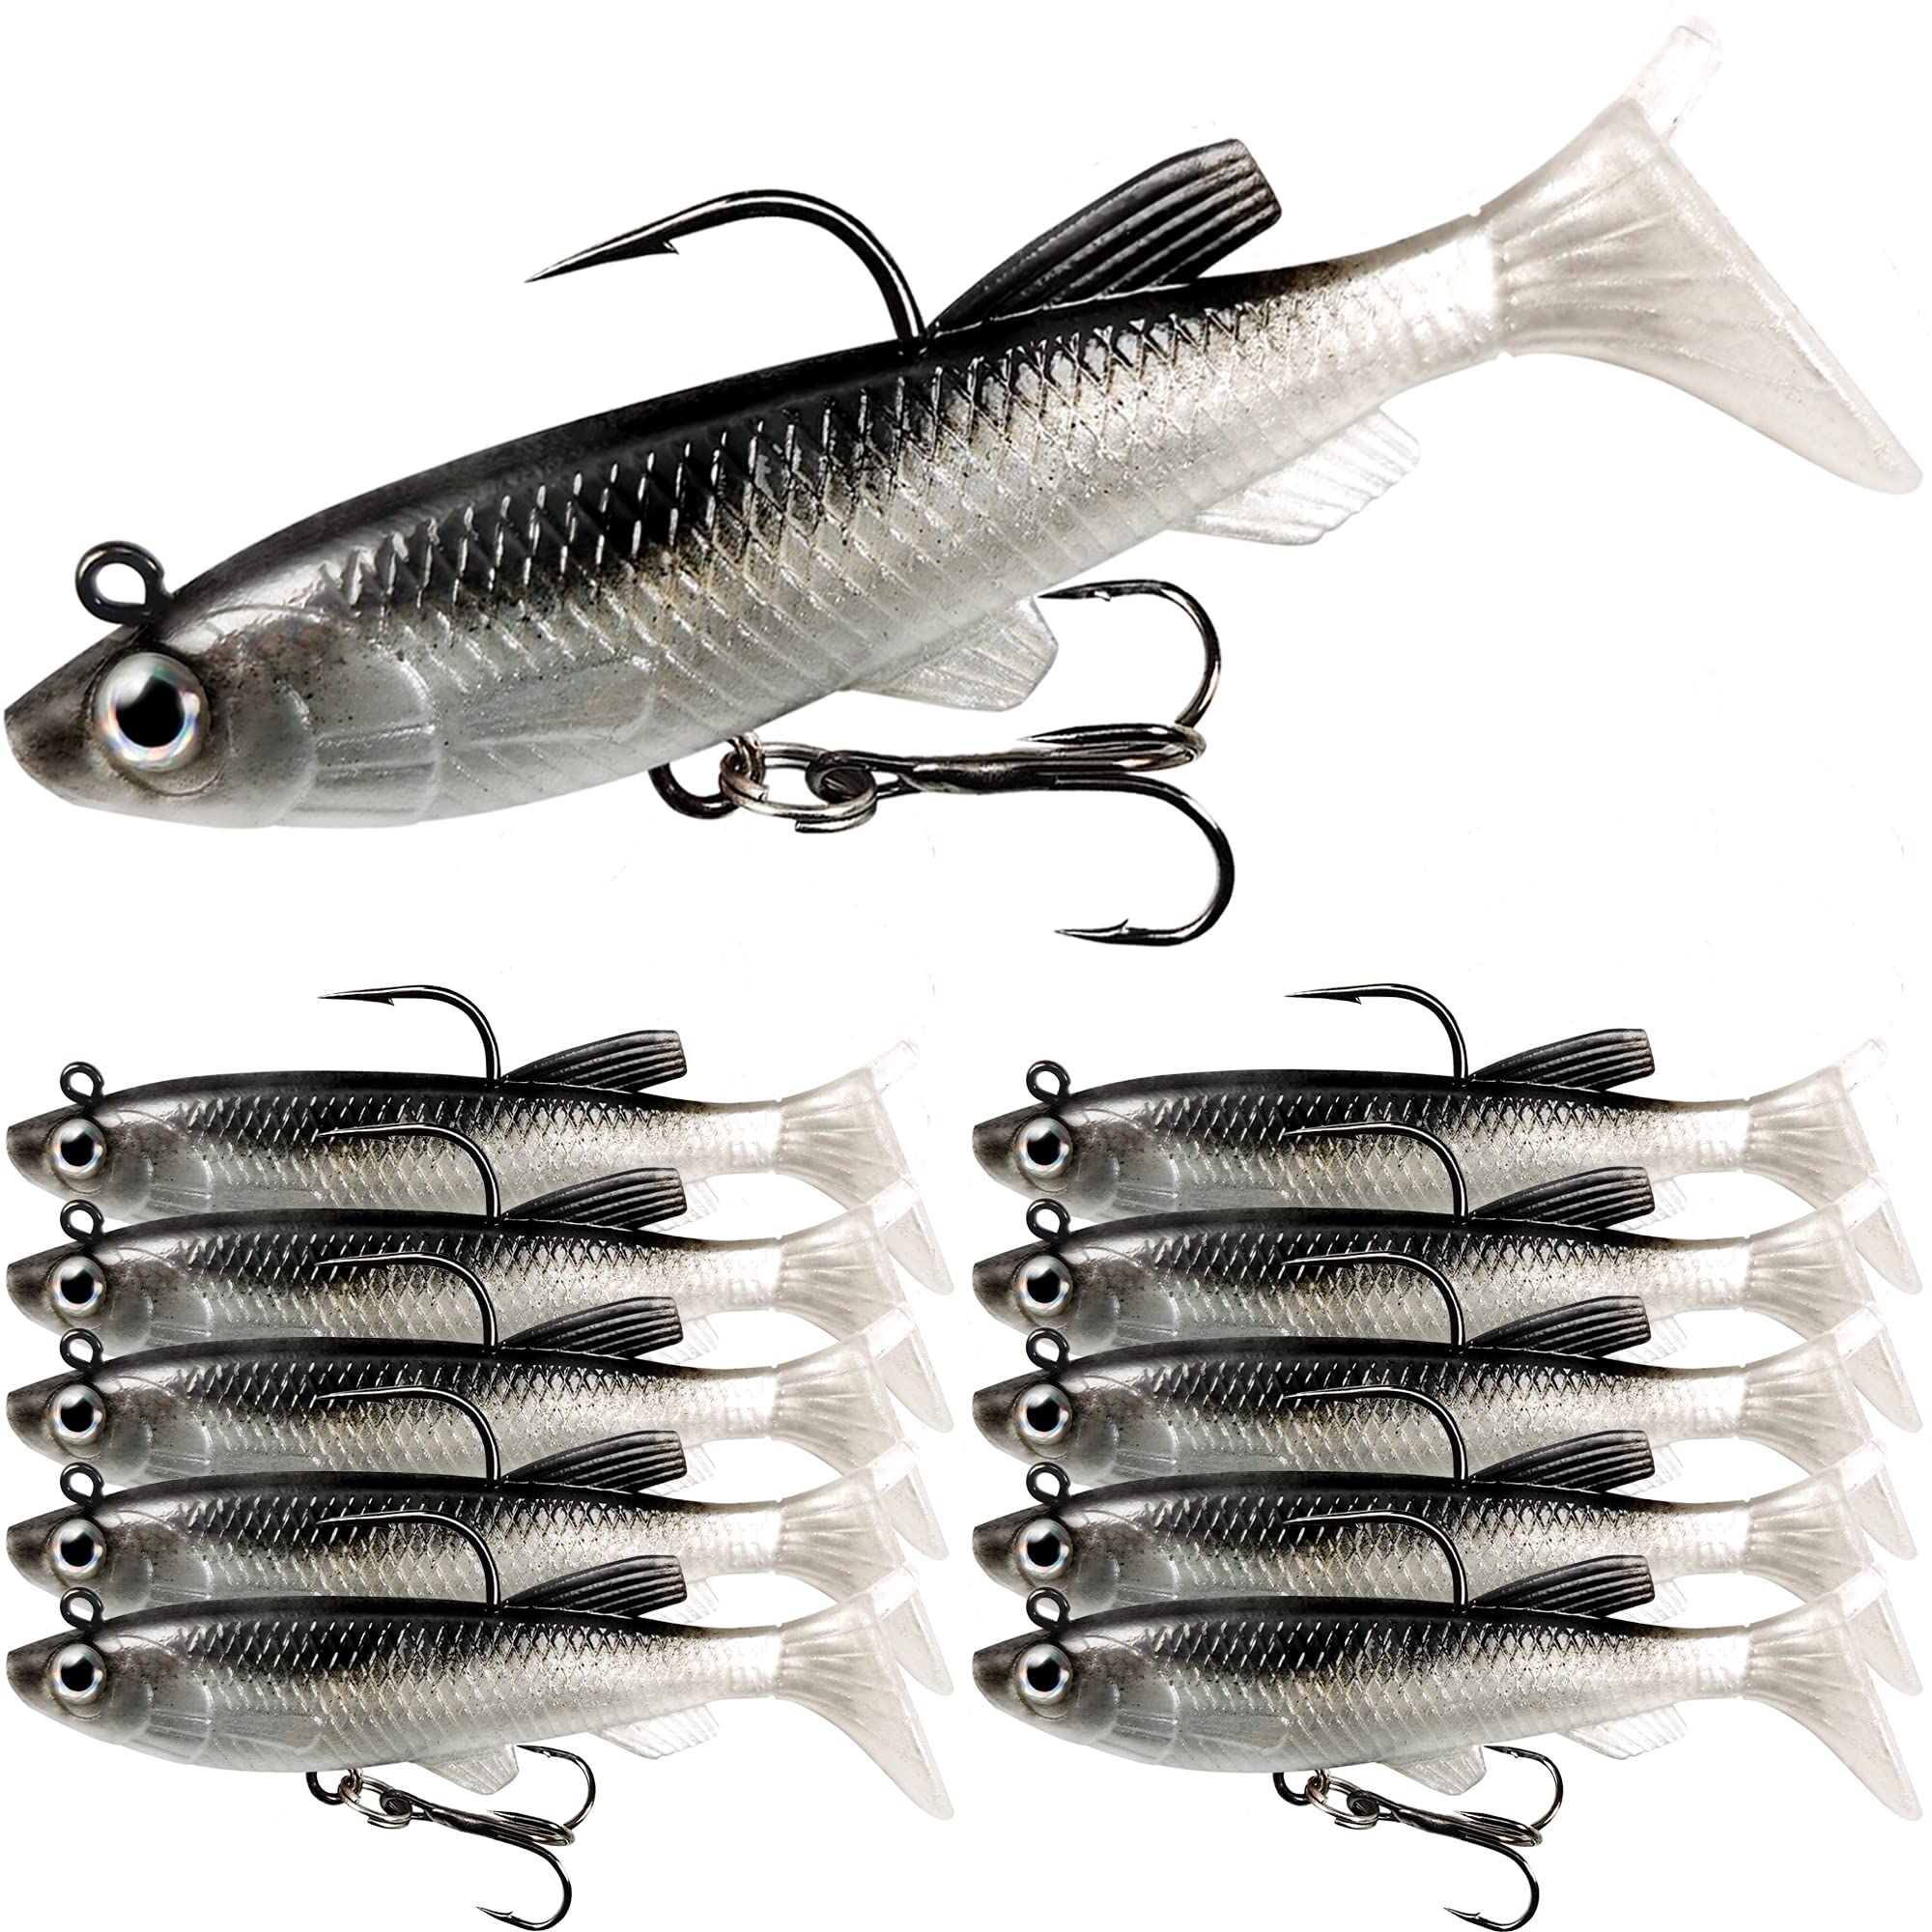 VMSIXVM Tube Baits Tube Jigs Heads Swimbaits Kit, Pre-Rigged Tubes Lure  Soft Plastic Fishing Grub Worm, Tube Bait Hooks Crappie Jigs Crappie Lures  Tackle for Bass Trout Freshwater Saltwater Fishing, Soft Plastic